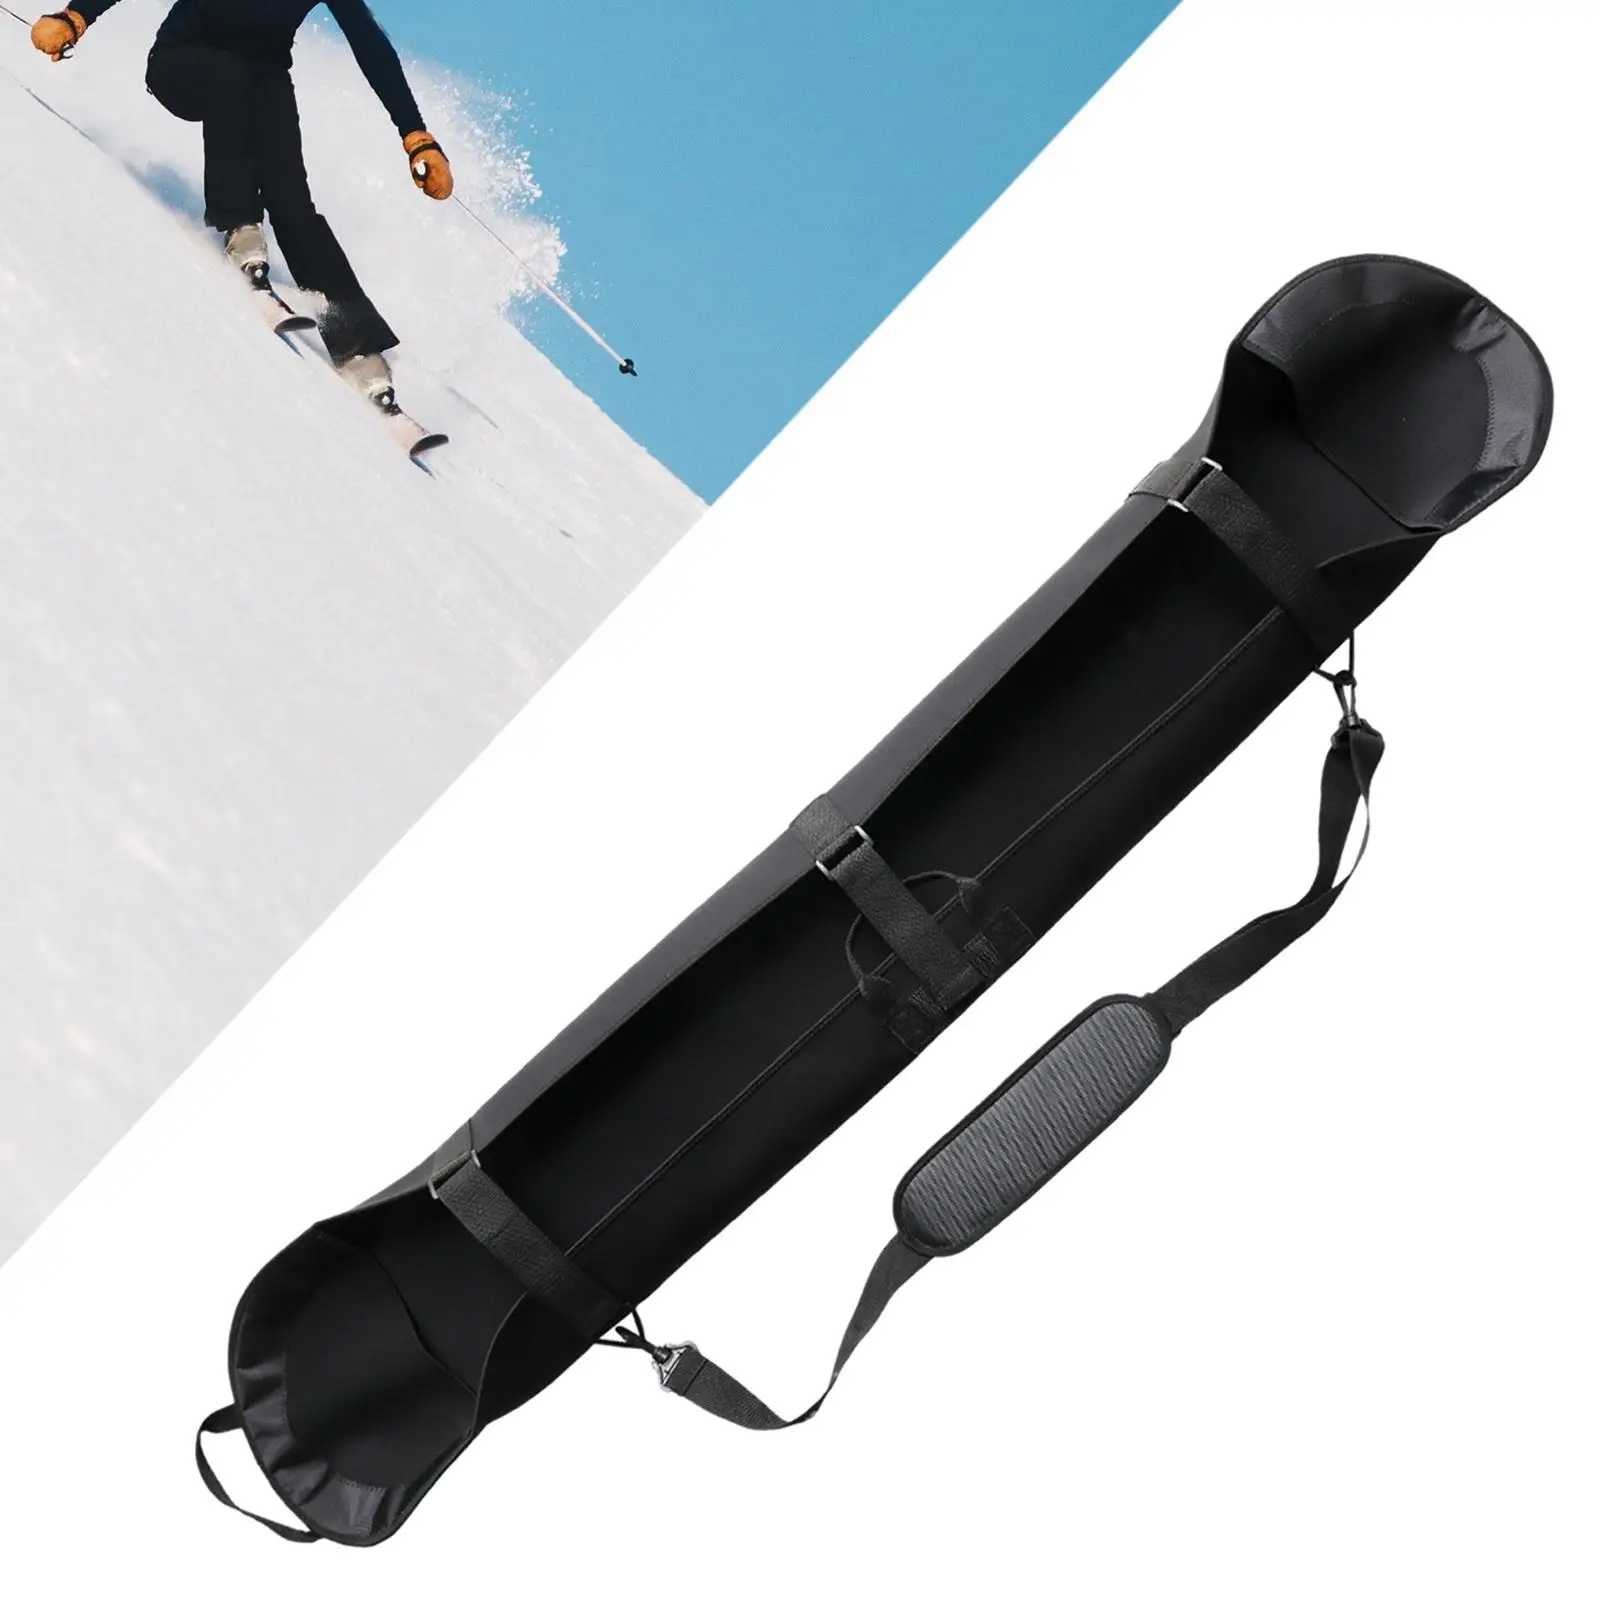 Snowboard Bag Durable Snowboard Gear Bag for Winter Sports Skating Outdoor